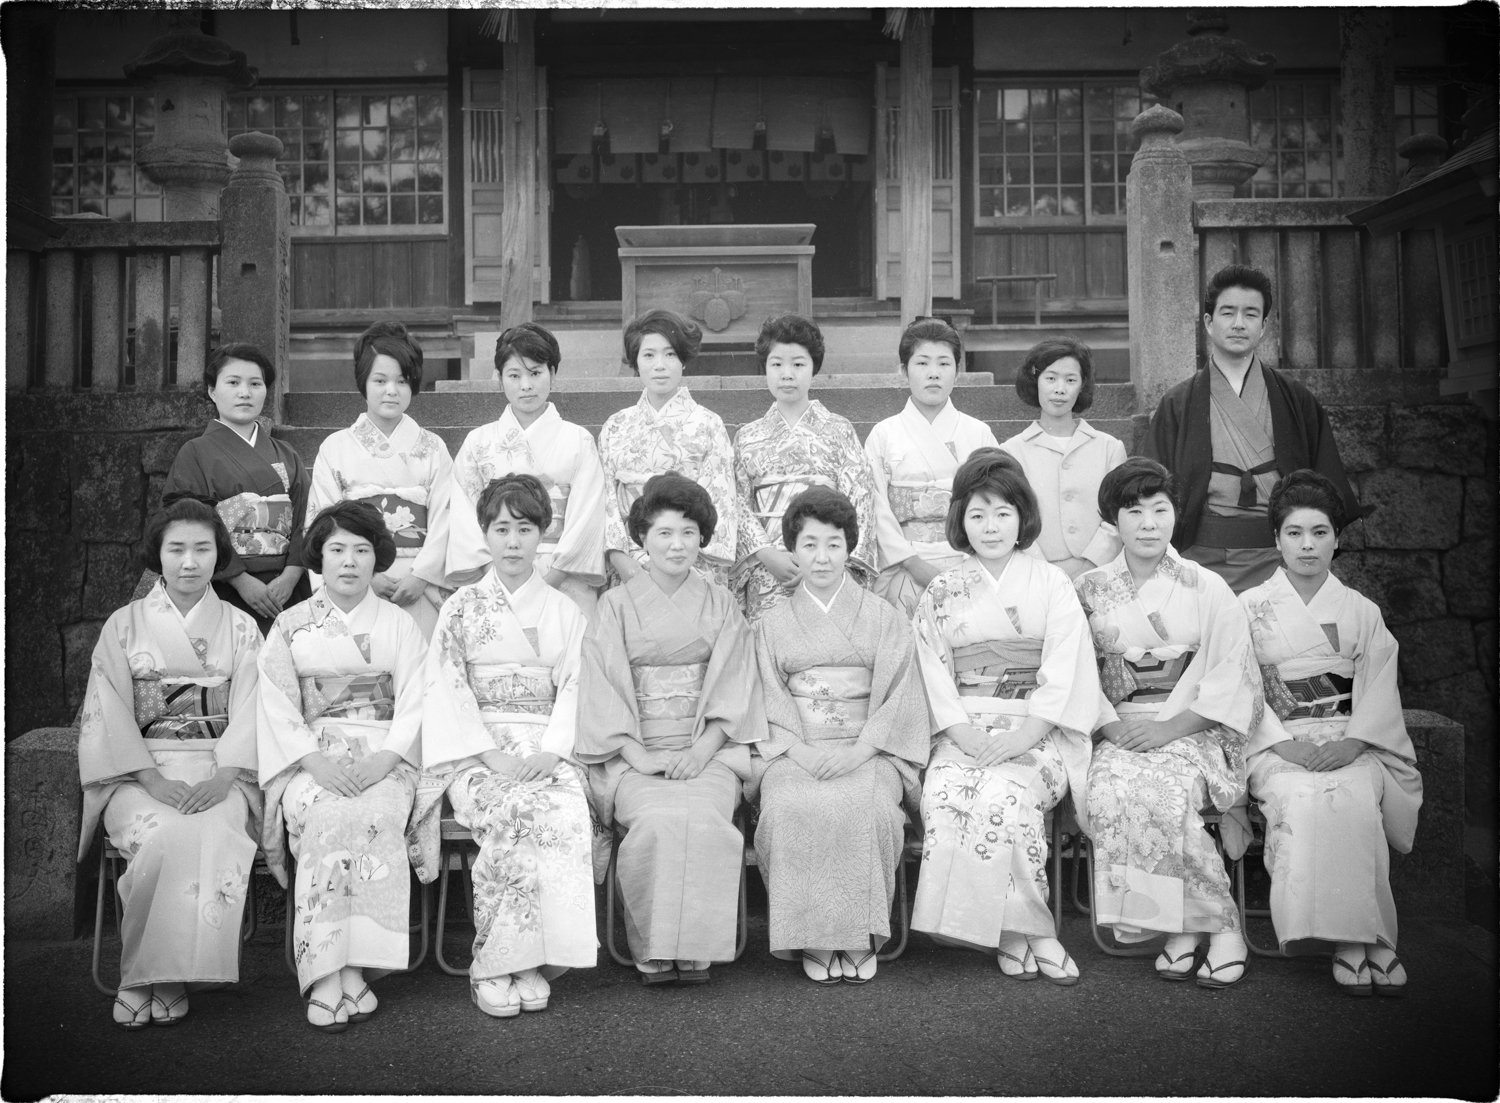 Portrait of a group of Japanese women in their traditional costume Photography Pierre Toutain-Dorbec #016 .jpg